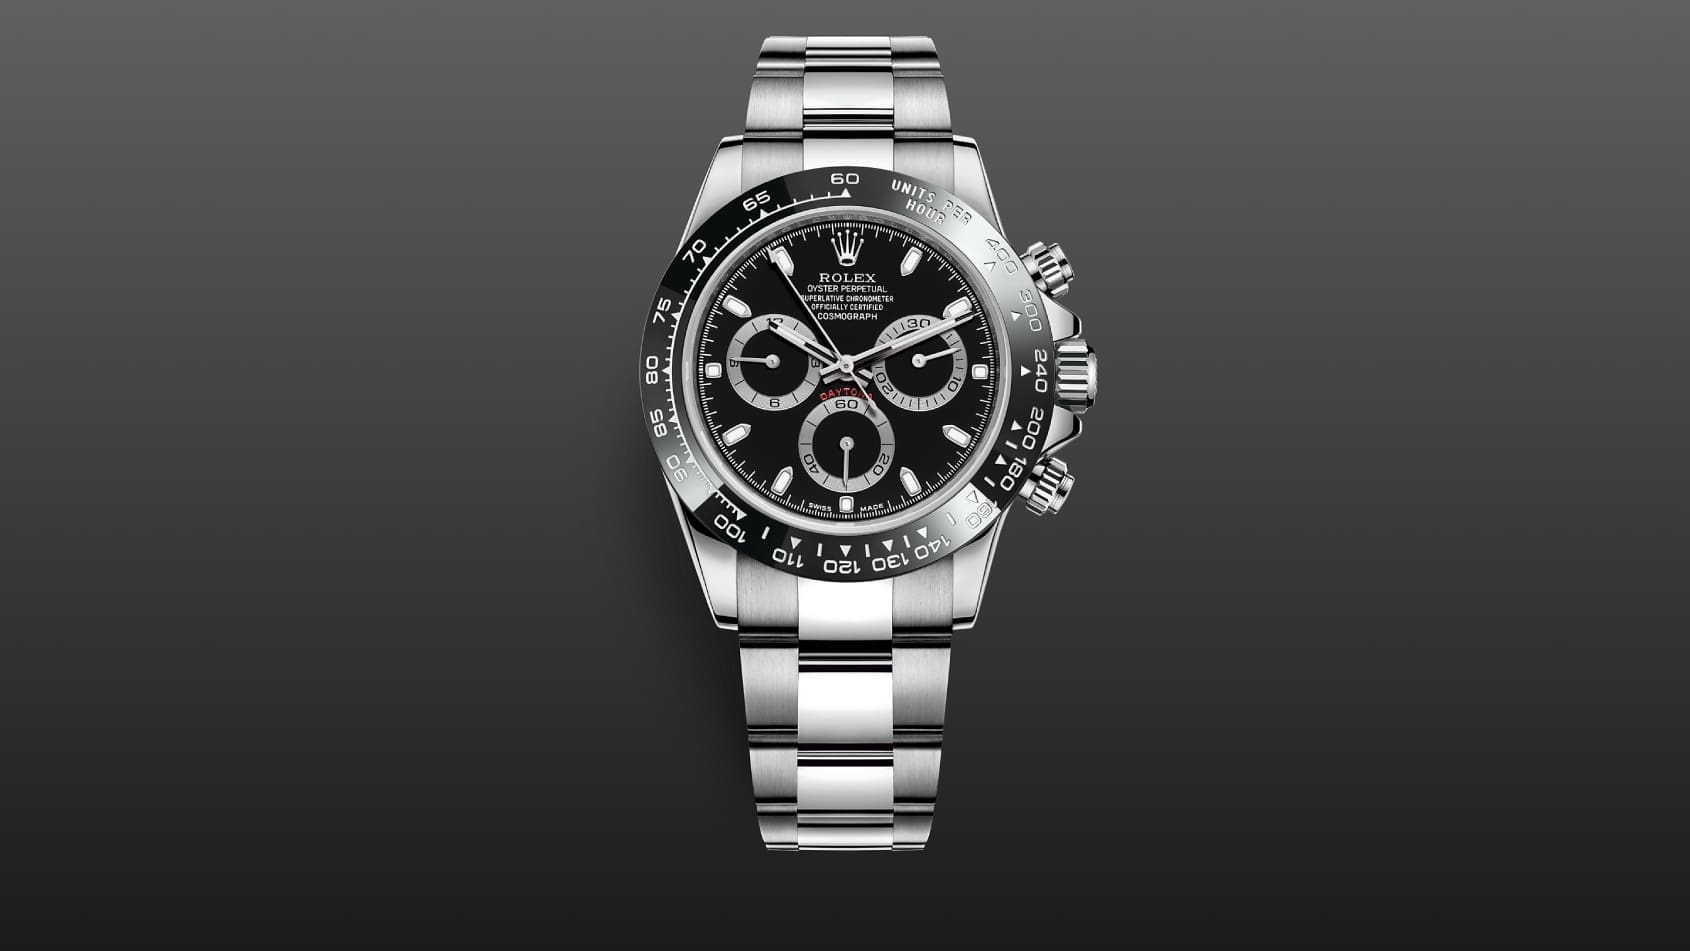 Why the Rolex Daytona is the ultimate FOMO trigger chronograph